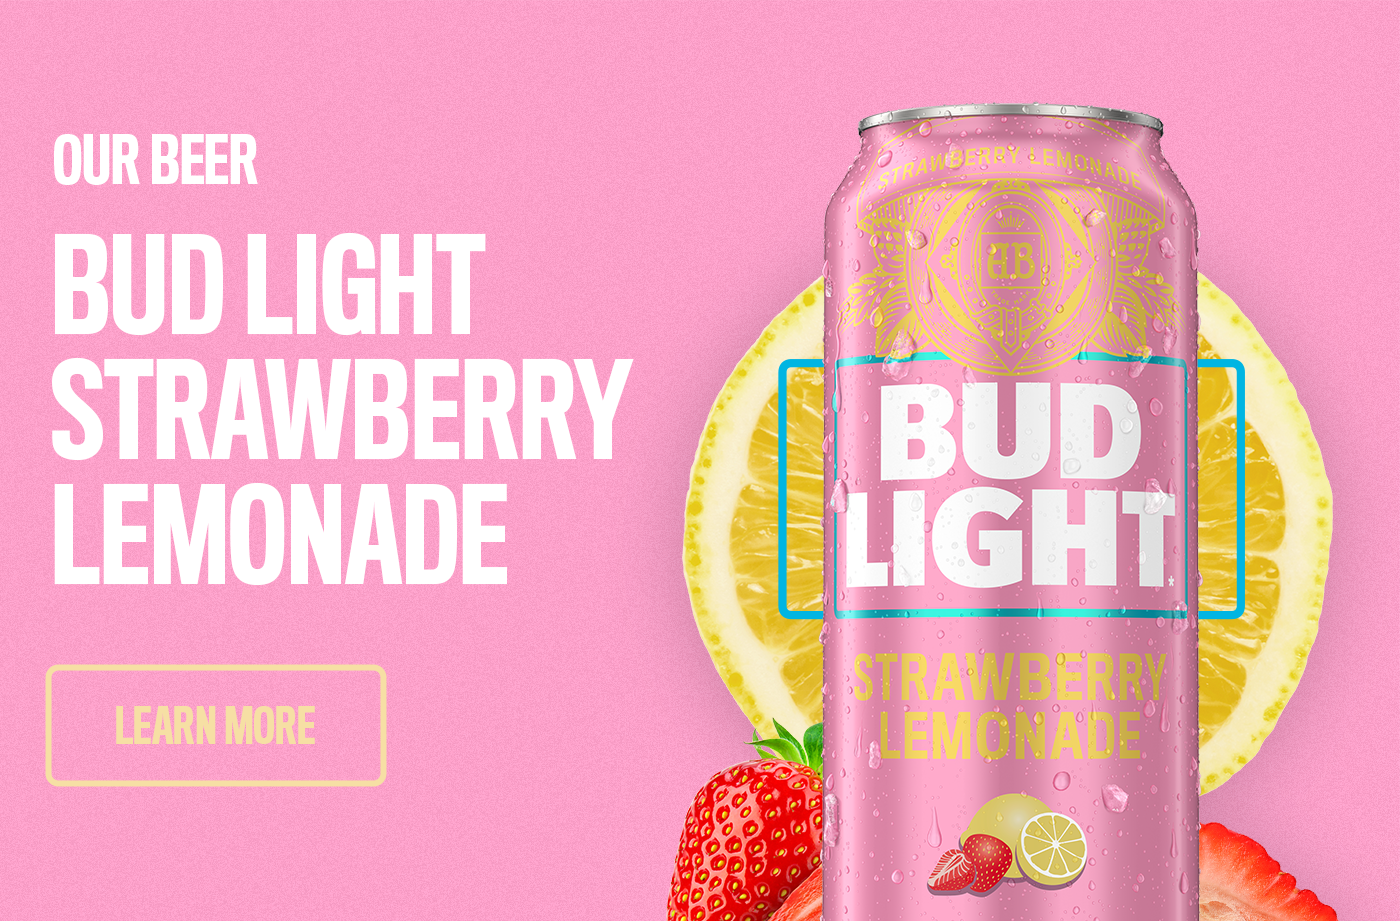 Learn more about our new Bud Light Strawberry Lemonade